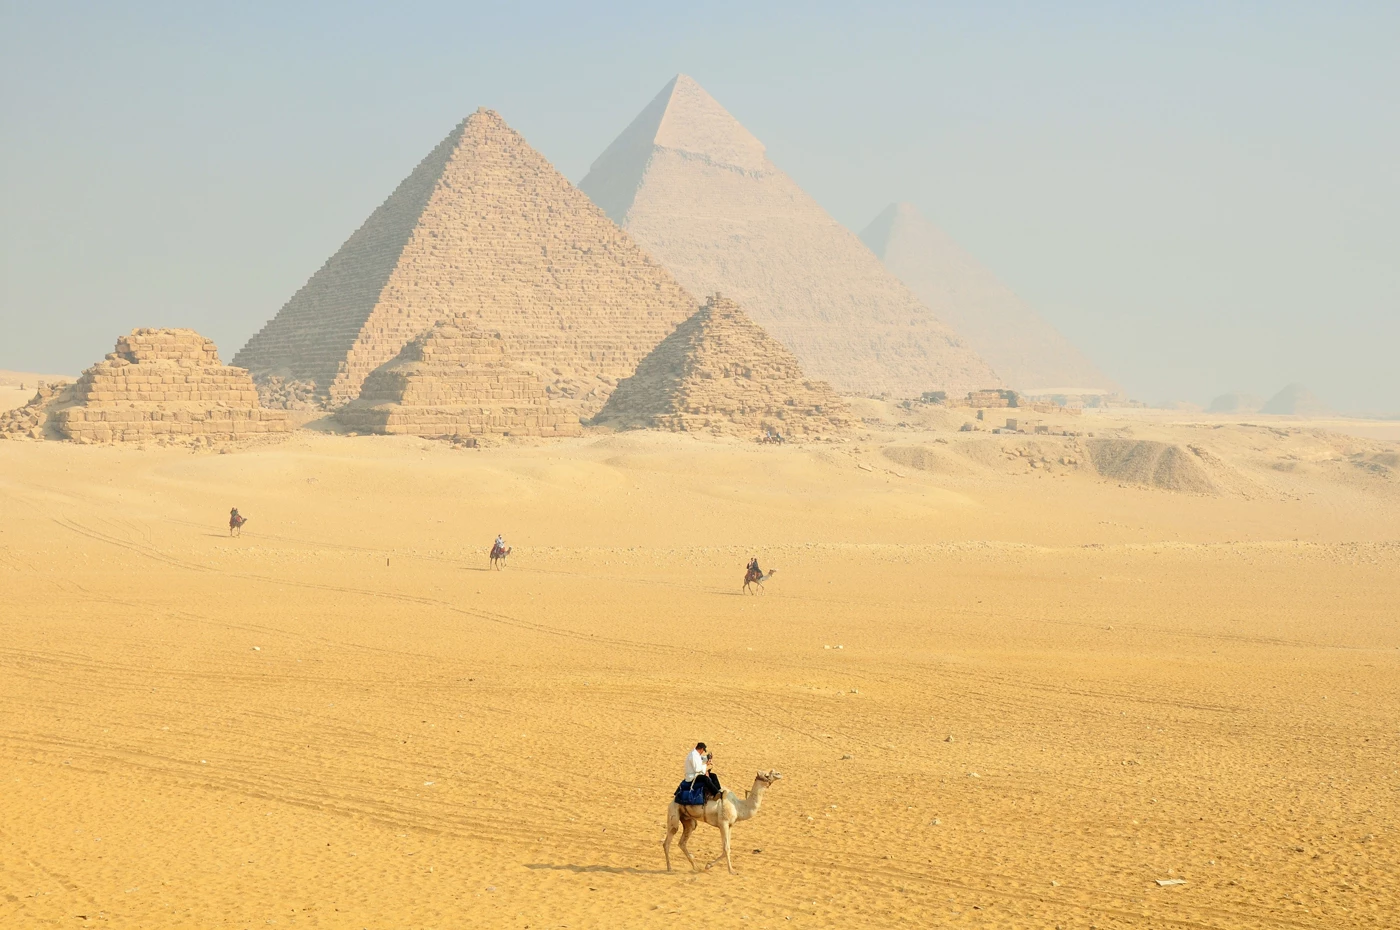 A sandy desert with the Great Pyramids of Giza in the distance